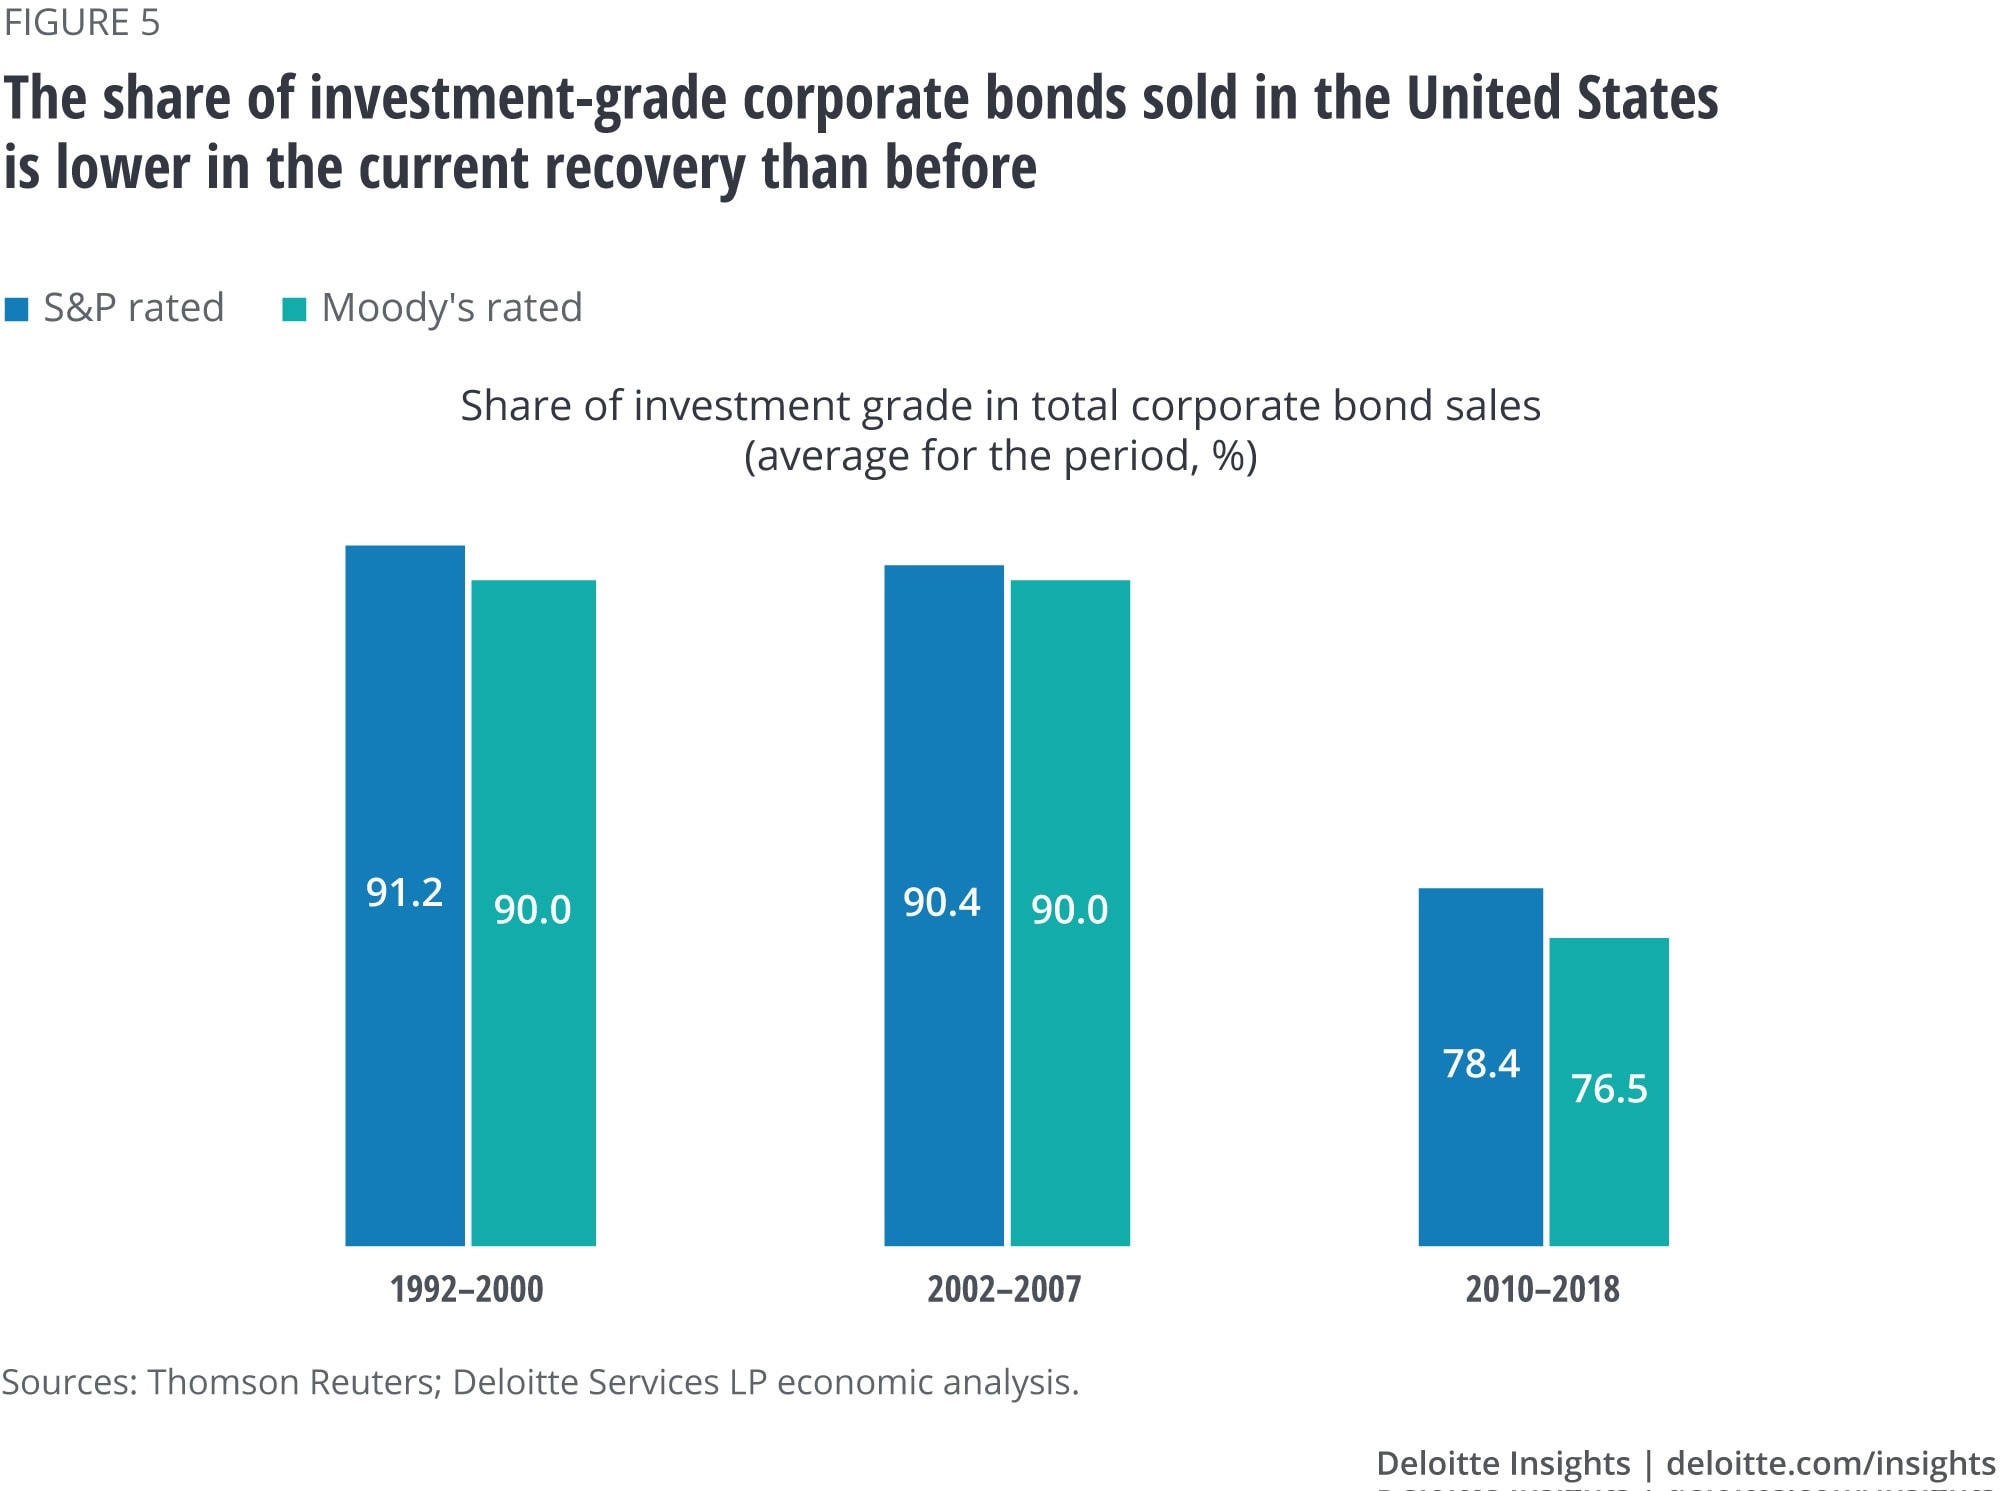 Share of investment-grade corporate bonds sold in the United States is lower in the current recovery than before